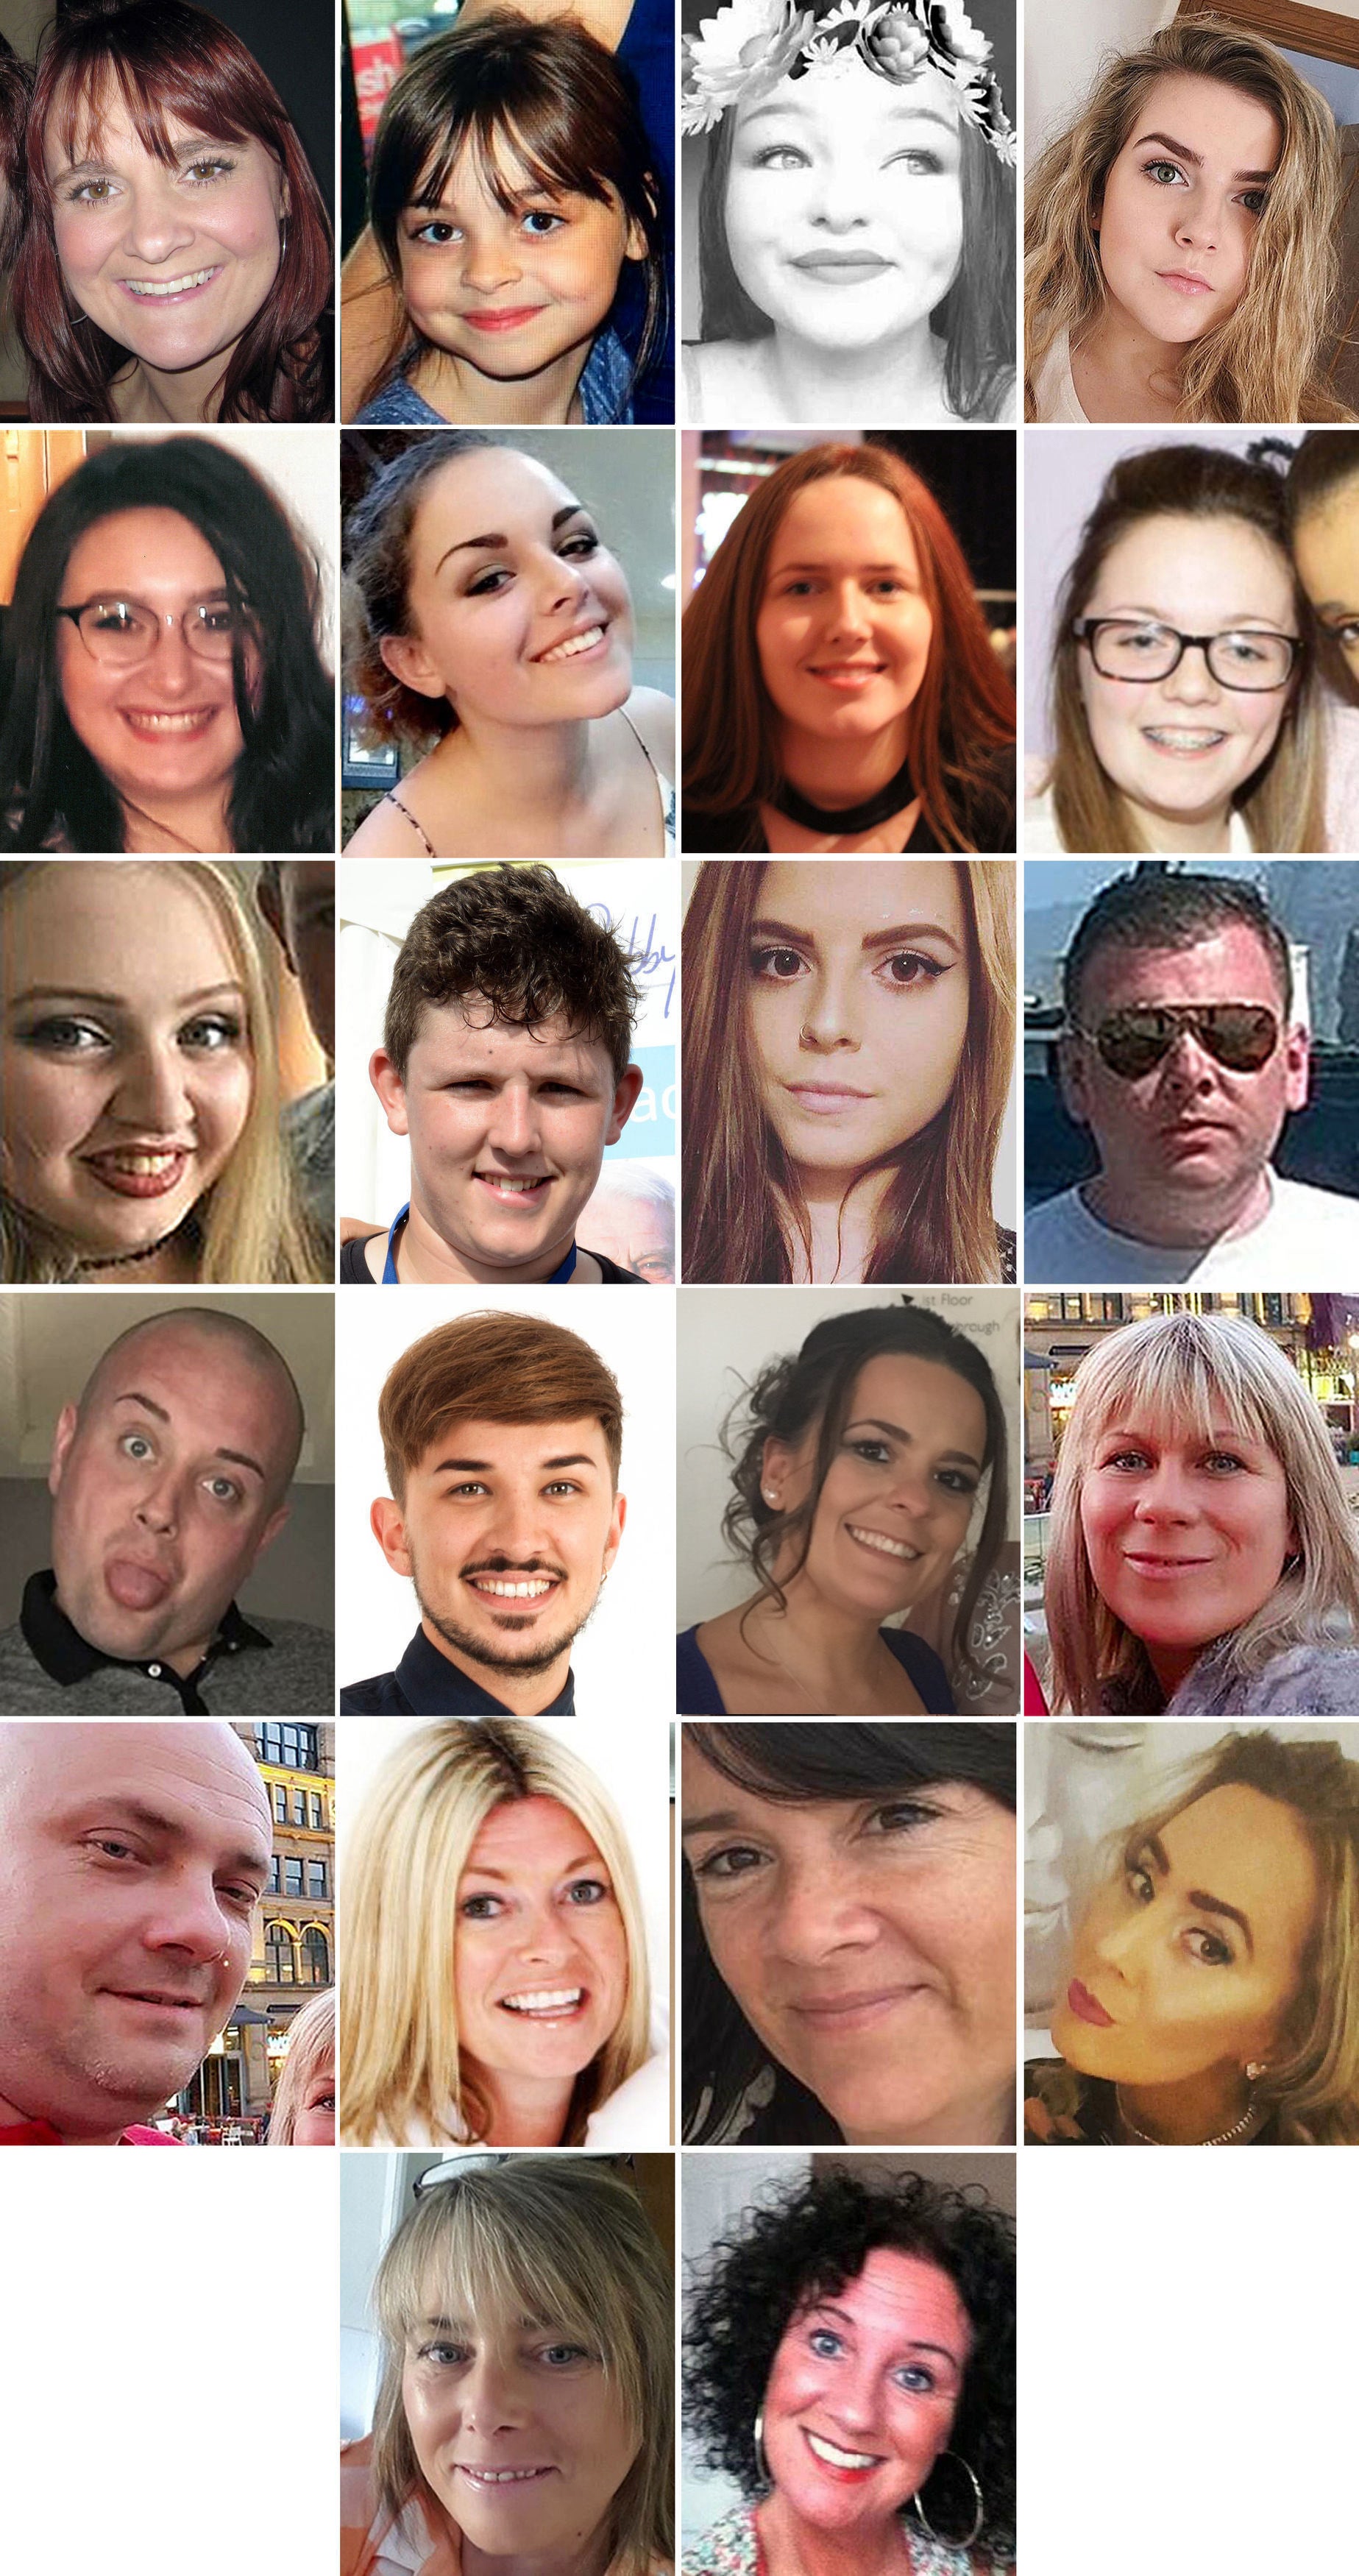 The 22 victims of the terror attack during the Ariana Grande concert at the Manchester Arena in May 2017. (Top row L to R) Off-duty police officer Elaine McIver, 43, Saffie Roussos, 8, Sorrell Leczkowski, 14, Eilidh MacLeod, 14, (2nd row L to R) Nell Jones, 14, Olivia Campbell-Hardy, 15, Megan Hurley, 15, Georgina Callander, 18, (3rd row L to R), Chloe Rutherford, 17, Liam Curry, 19, Courtney Boyle, 19, and Philip Tron, 32, (4th row L to R) John Atkinson, 26, Martyn Hett, 29, Kelly Brewster, 32, Angelika Klis, 39, (5th row L to R) Marcin Klis, 42, Michelle Kiss, 45, Alison Howe, 45, and Lisa Lees, 43 (6th row L to R) Wendy Fawell, 50 and Jane Tweddle, 51 (Greater Manchester Police/PA)